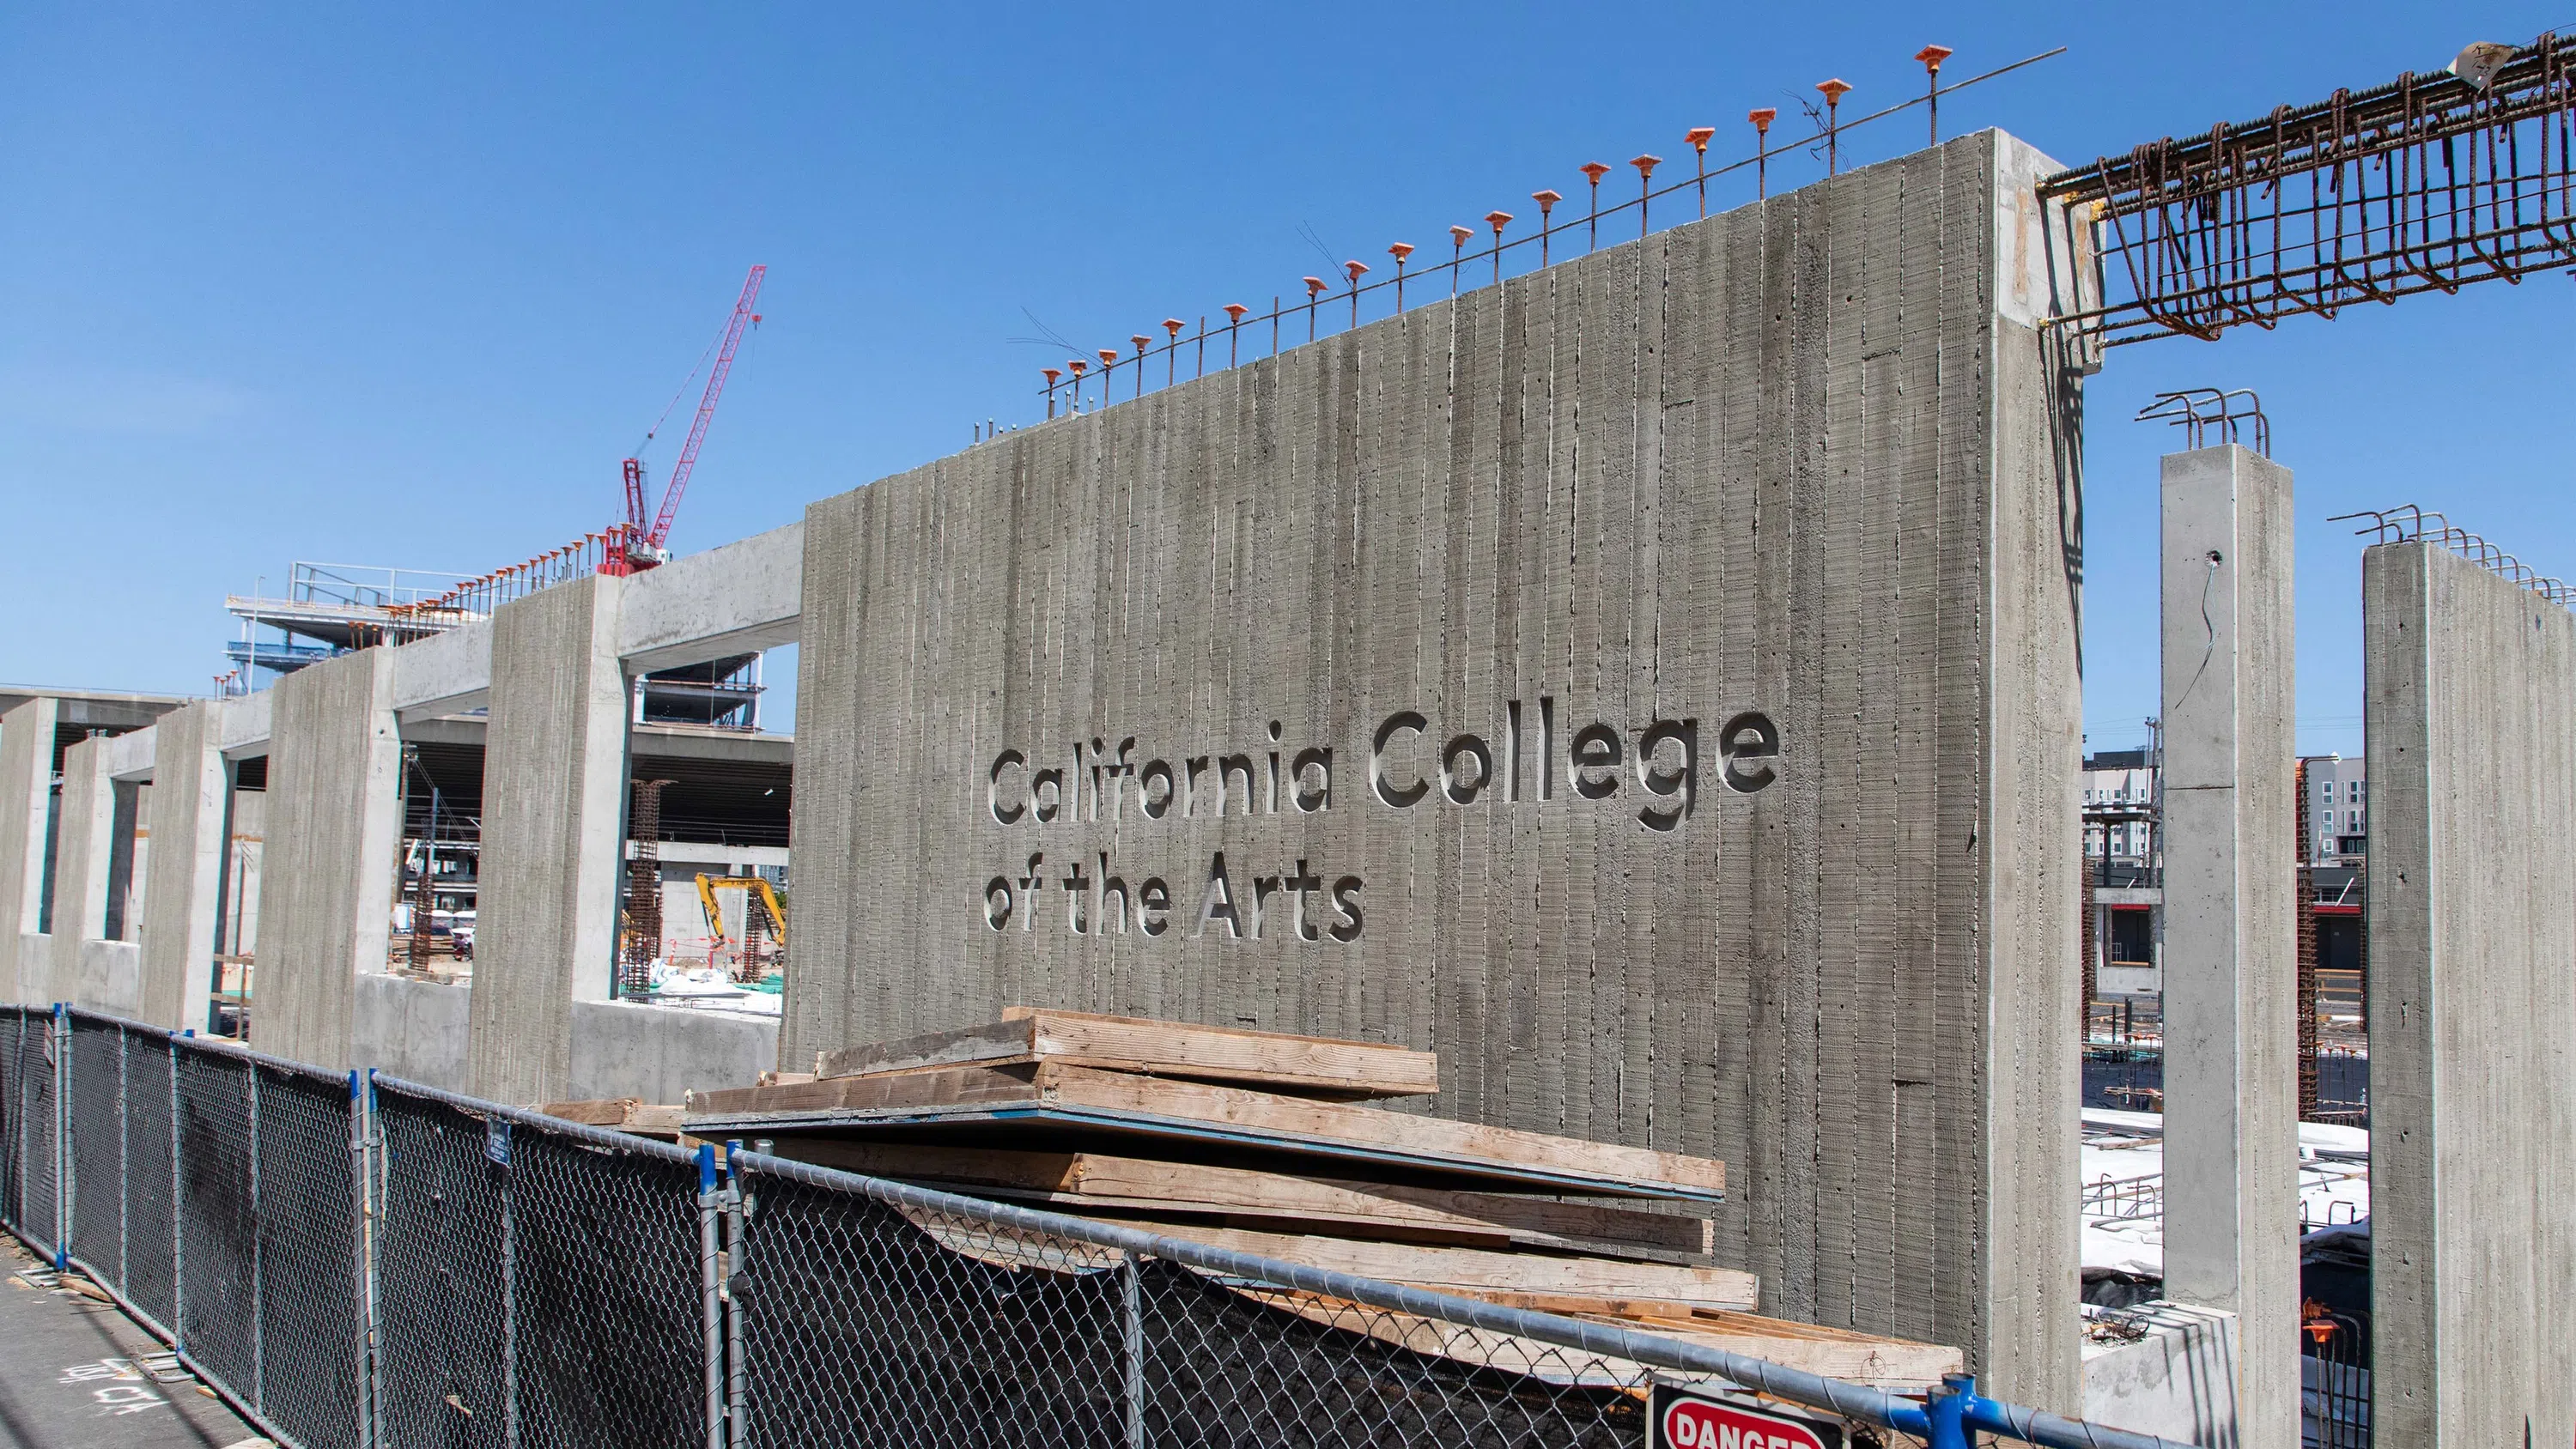 The words “California College of the Arts” engraved on a large slab.